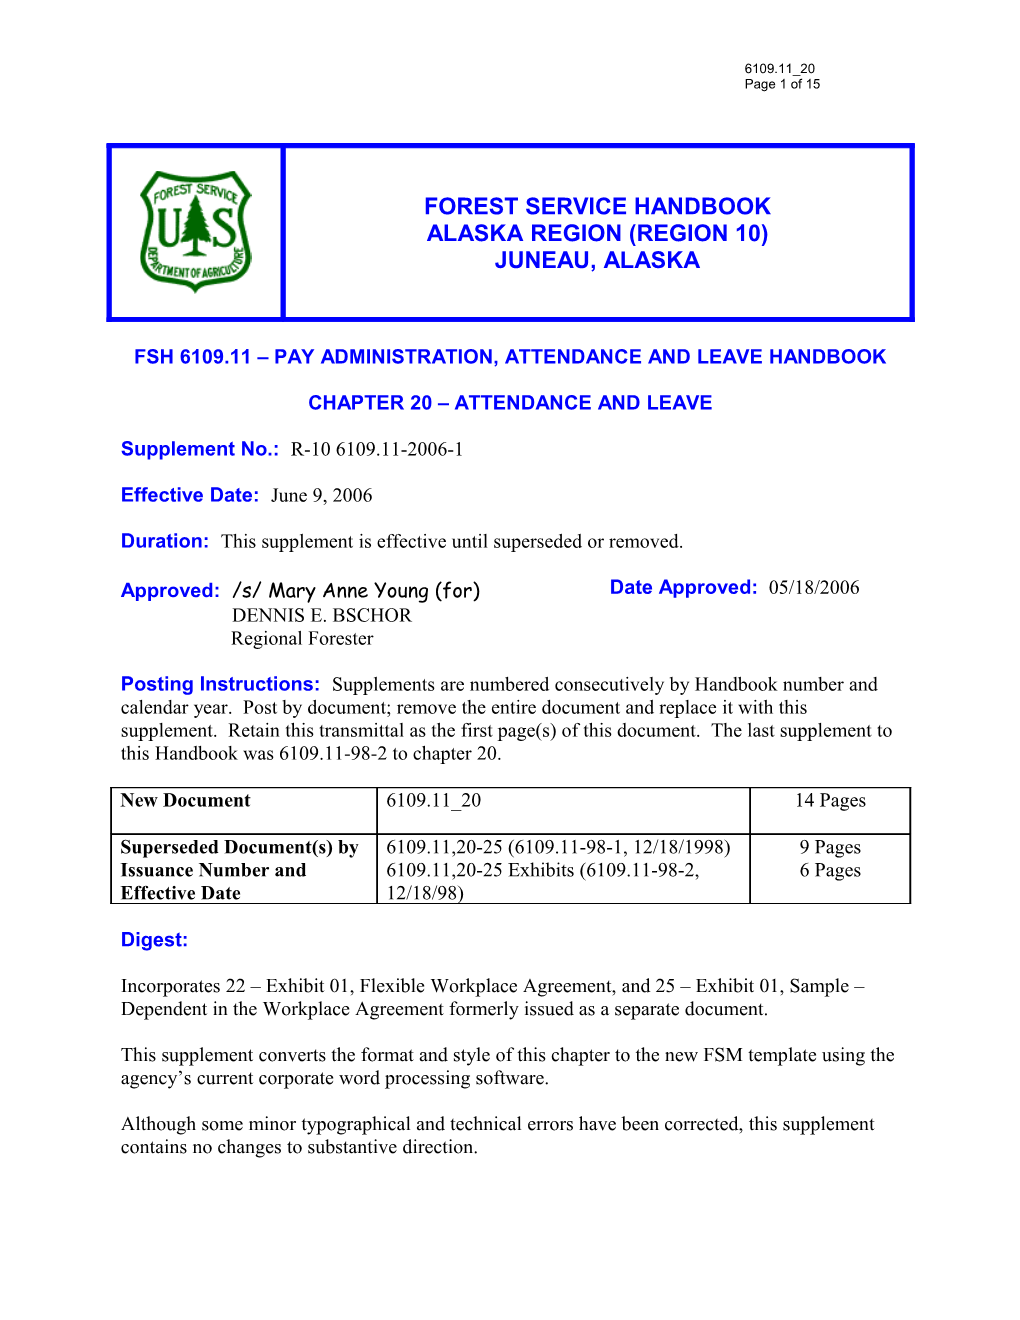 Fsh 6109.11 Pay Administration, Attendance and Leave Handbook